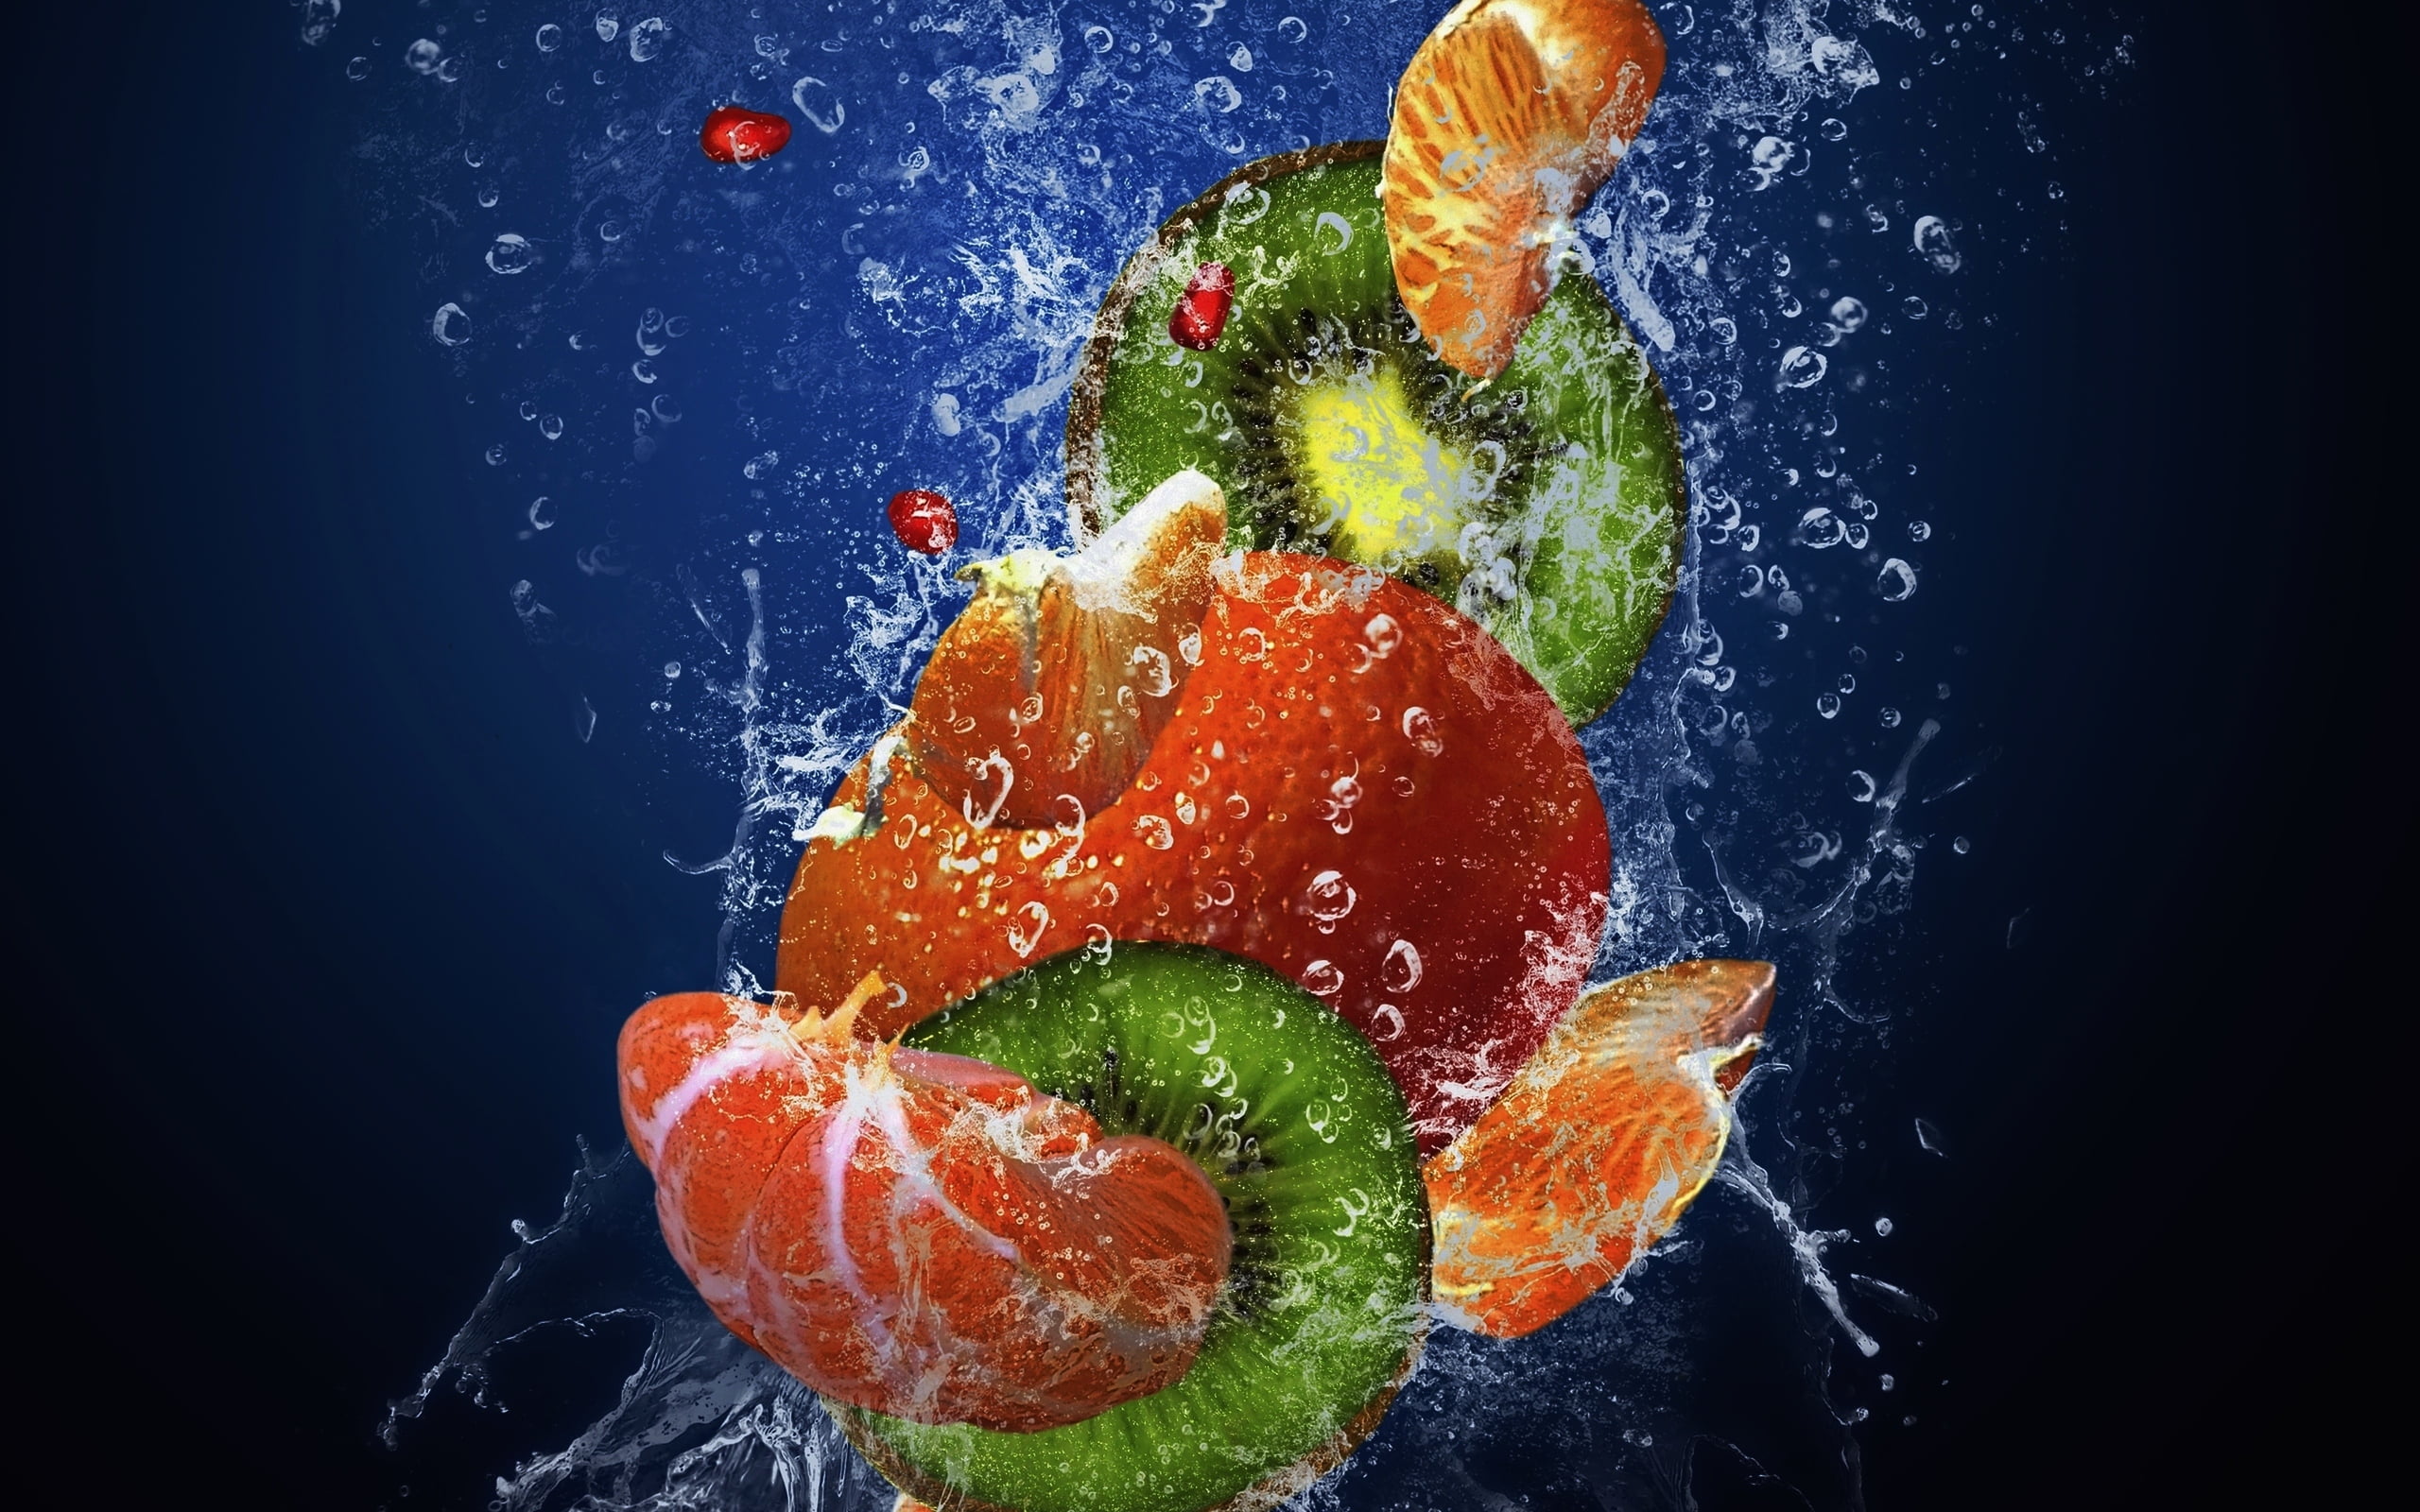 Free Download Hd Wallpaper Slices Of Kiwi Fruits Water Drops Squirt Freshness Garnet